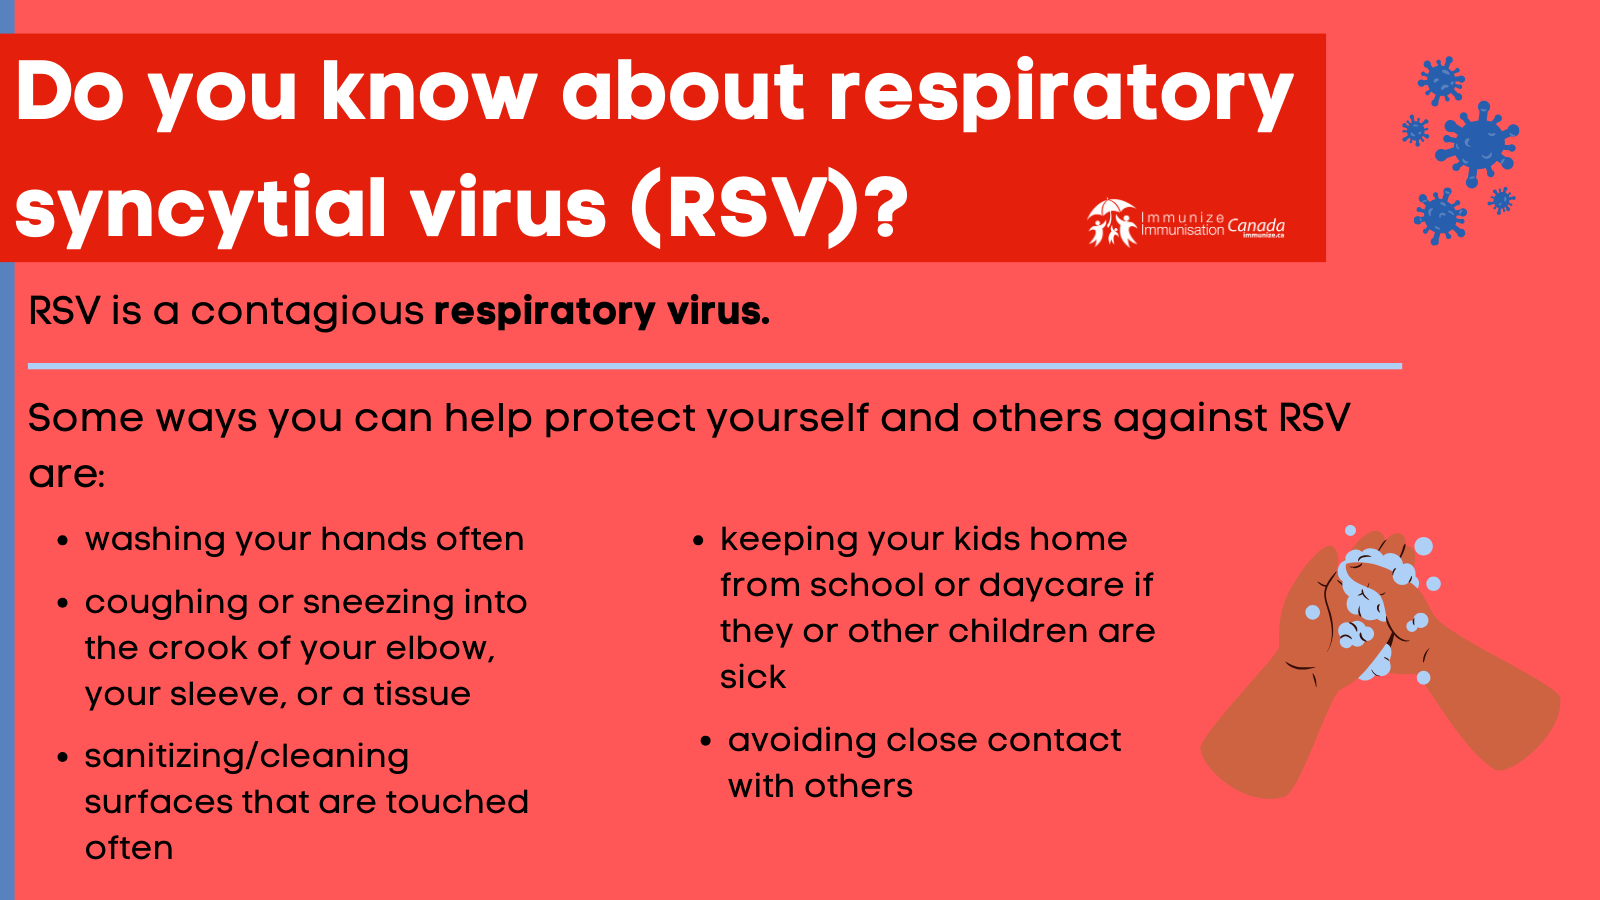 ​Do you know about respiratory syncytial virus (RSV)? - image 4 for Twitter